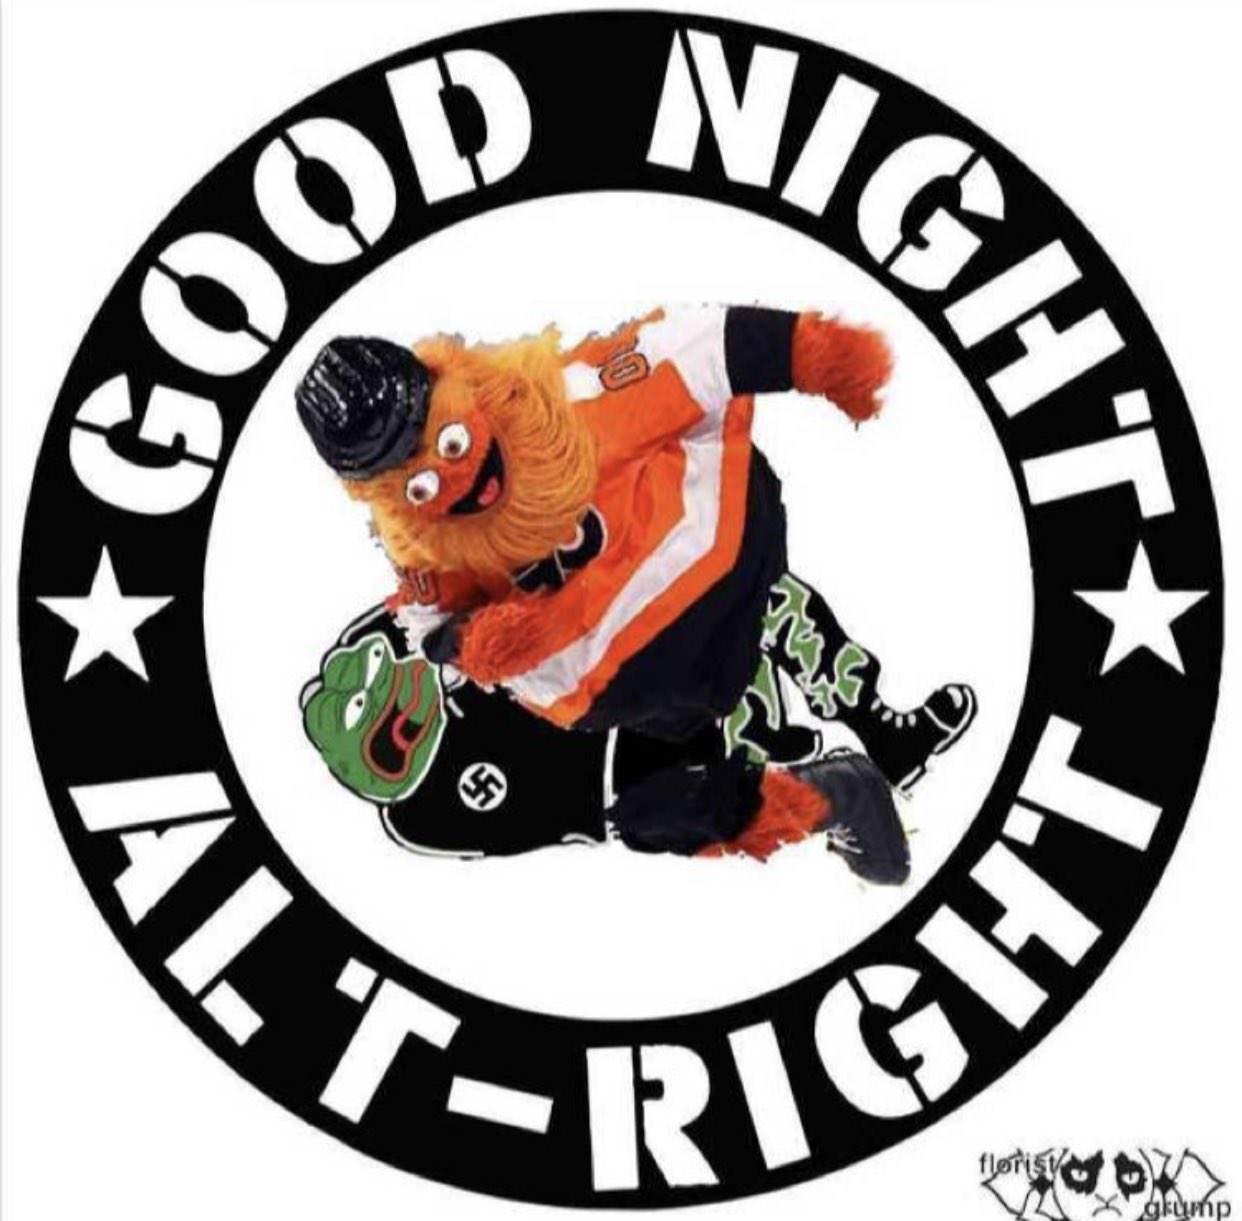 Gritty's Logo - This sub needs more Gritty! : GenZ